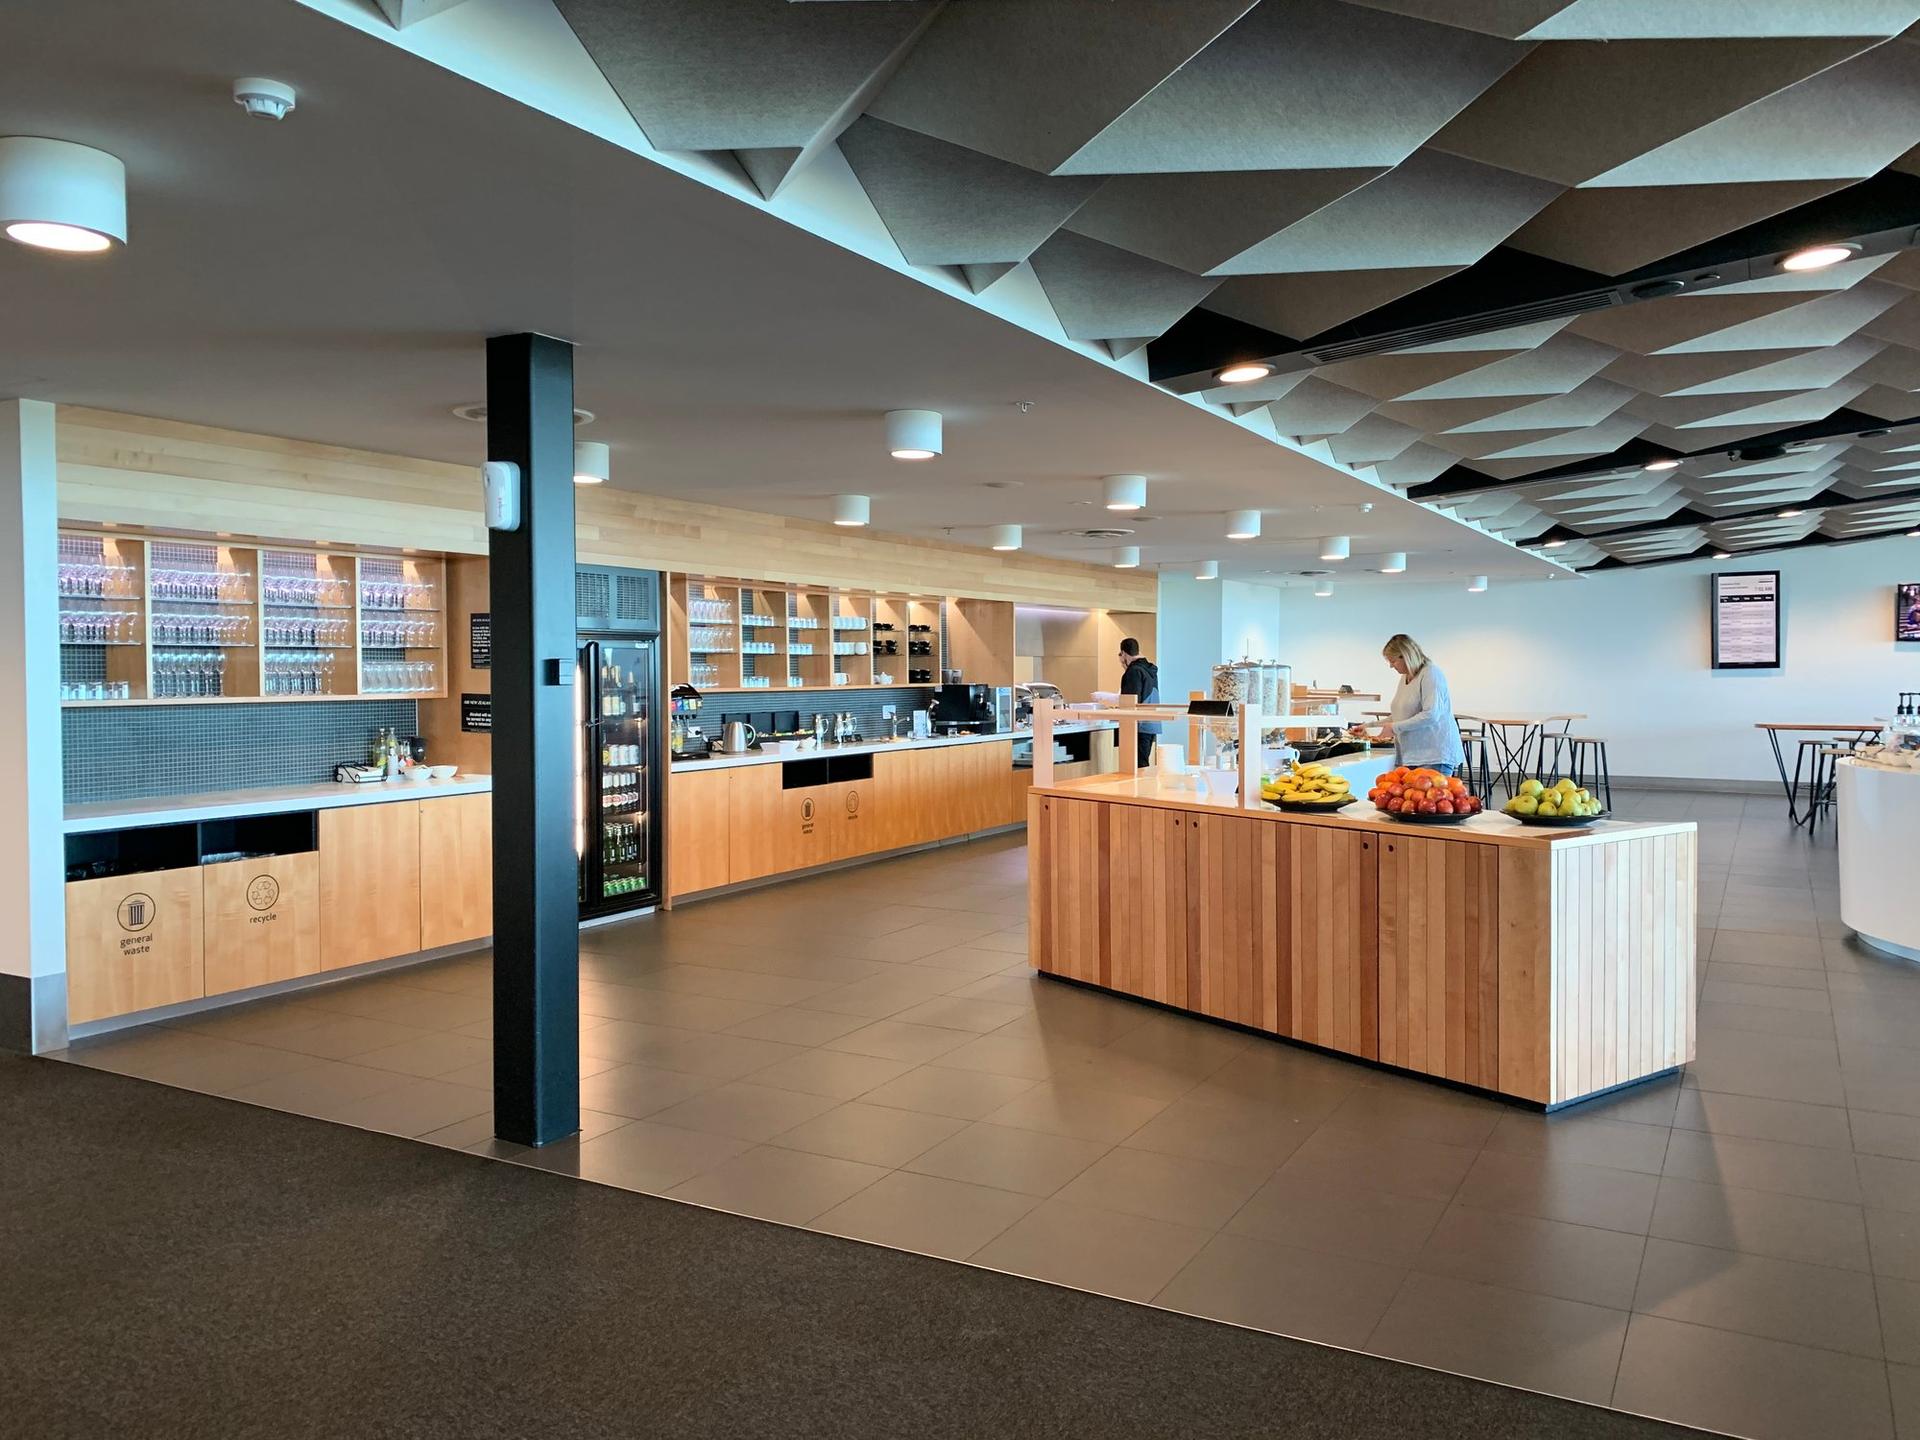 Air New Zealand Domestic Lounge image 6 of 6